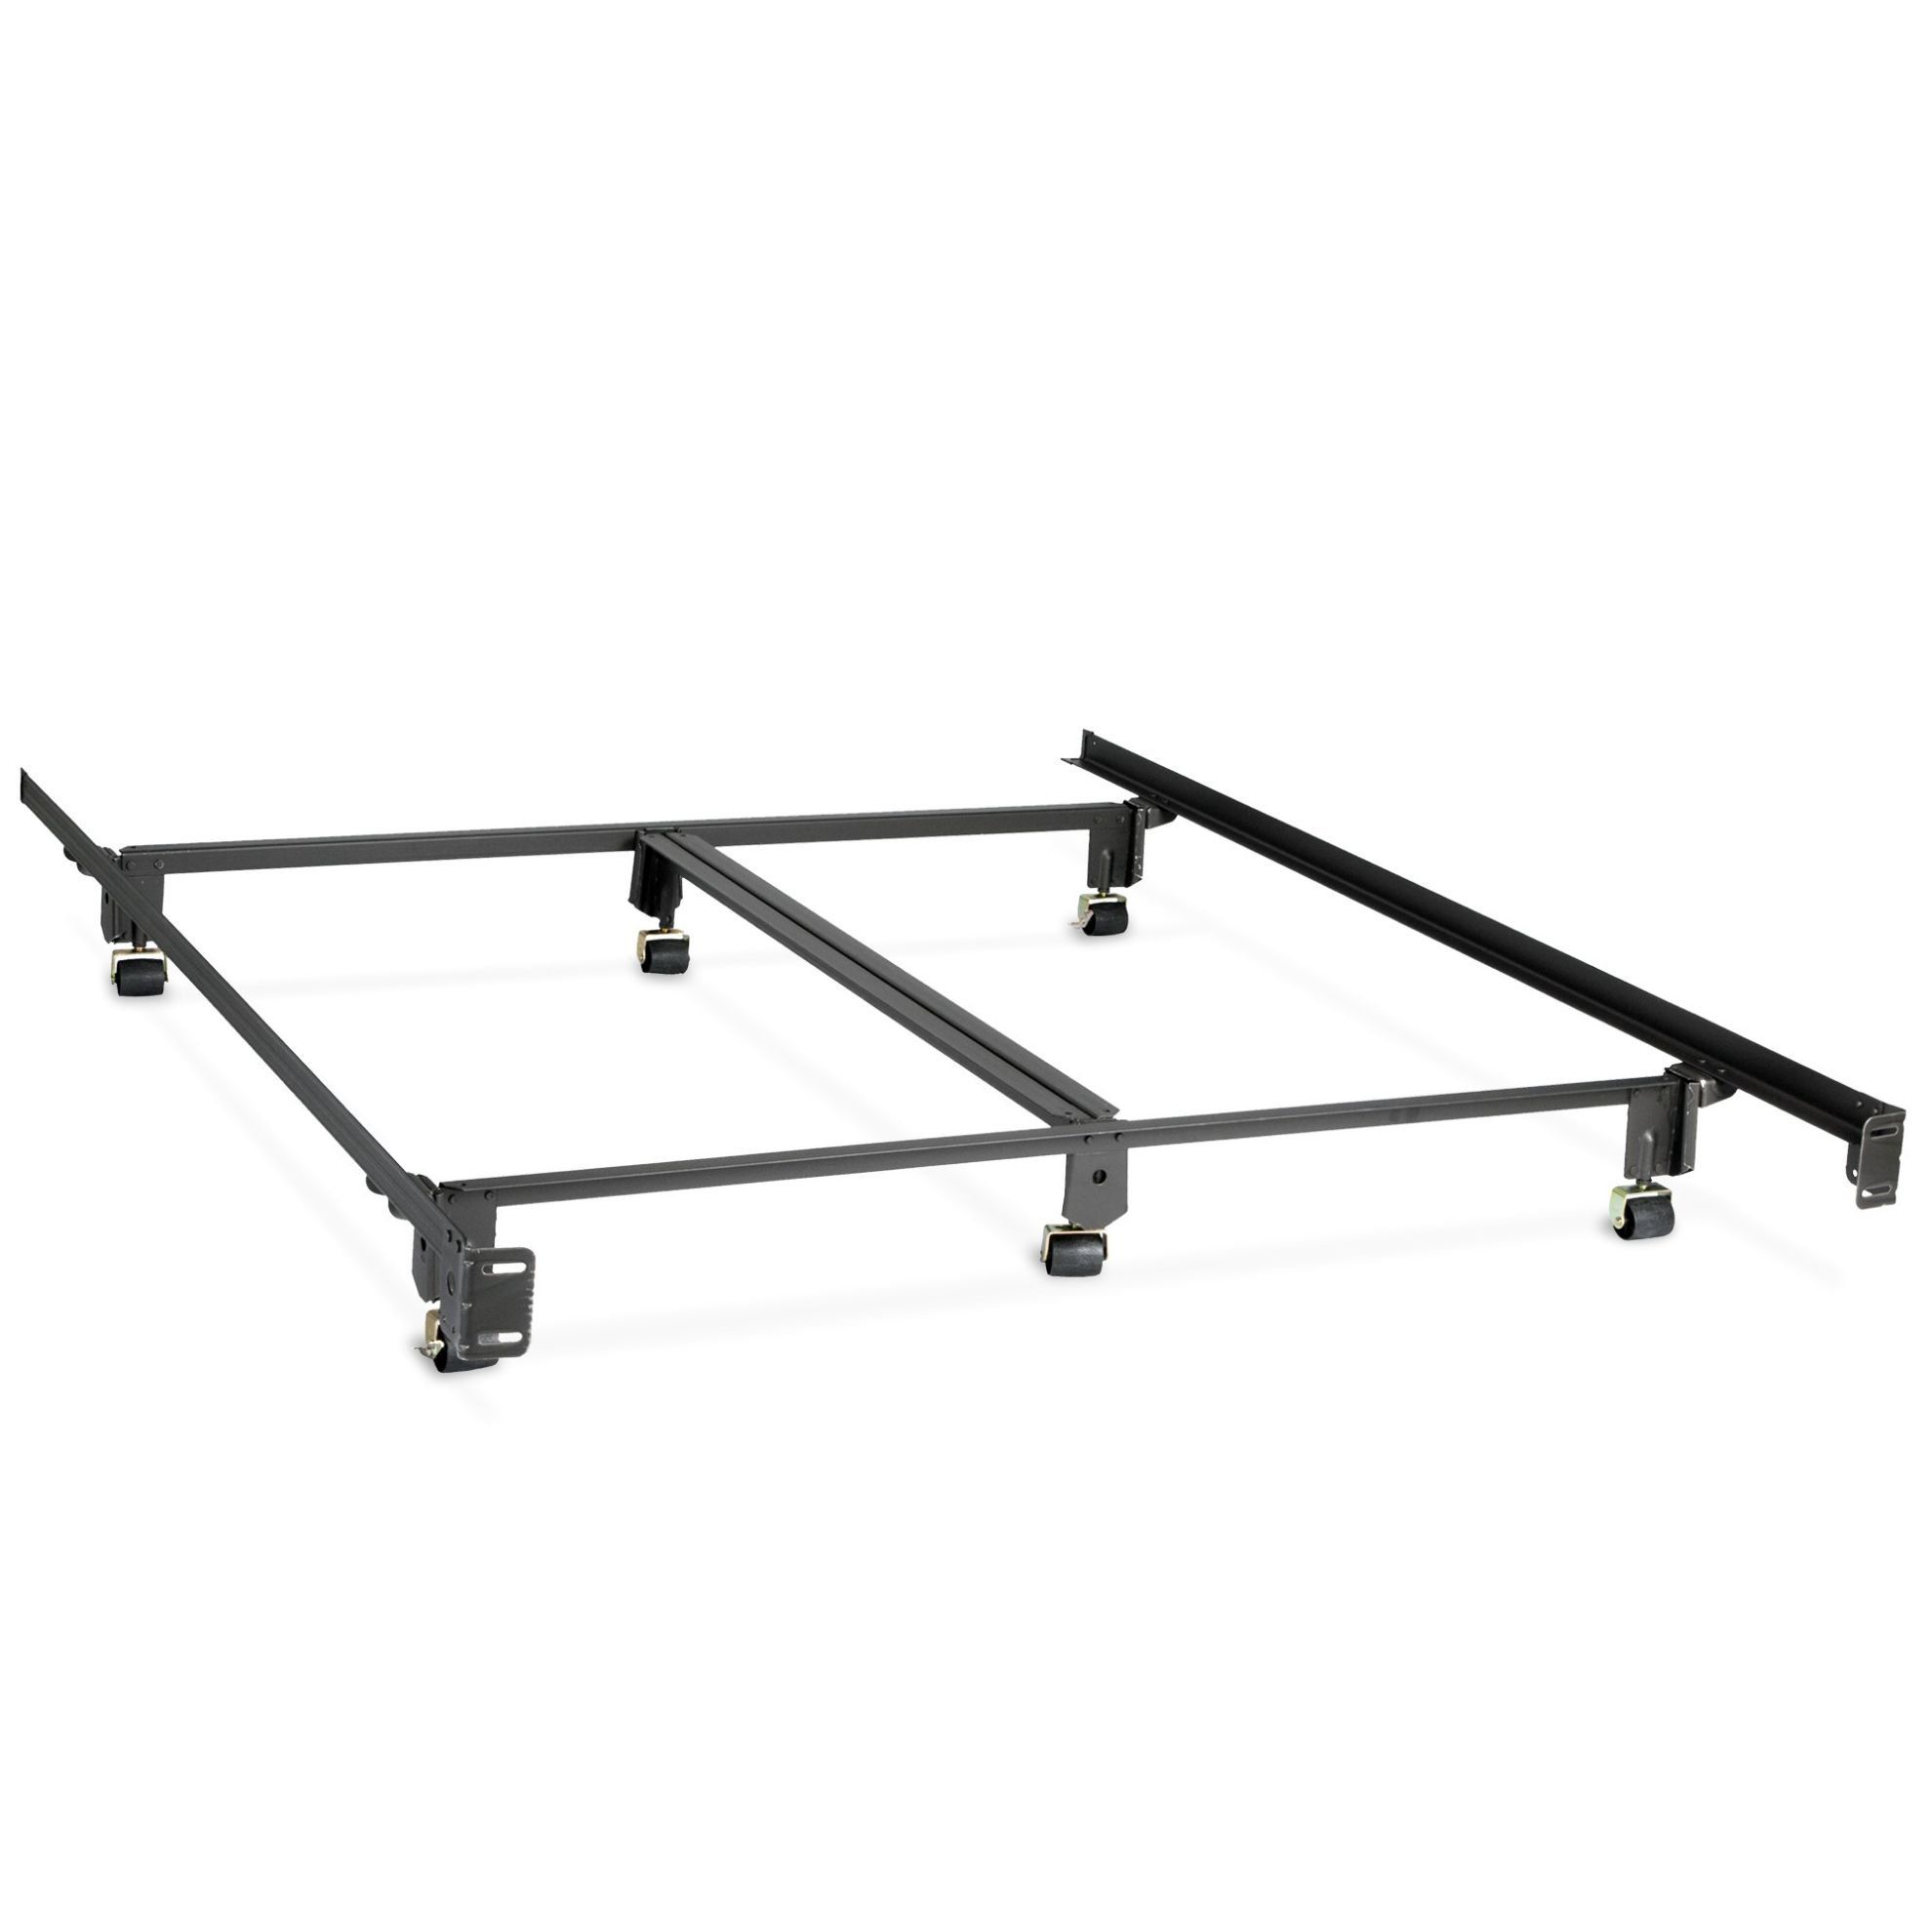 Glide-a-matic King Heavy Duty Bed Frame